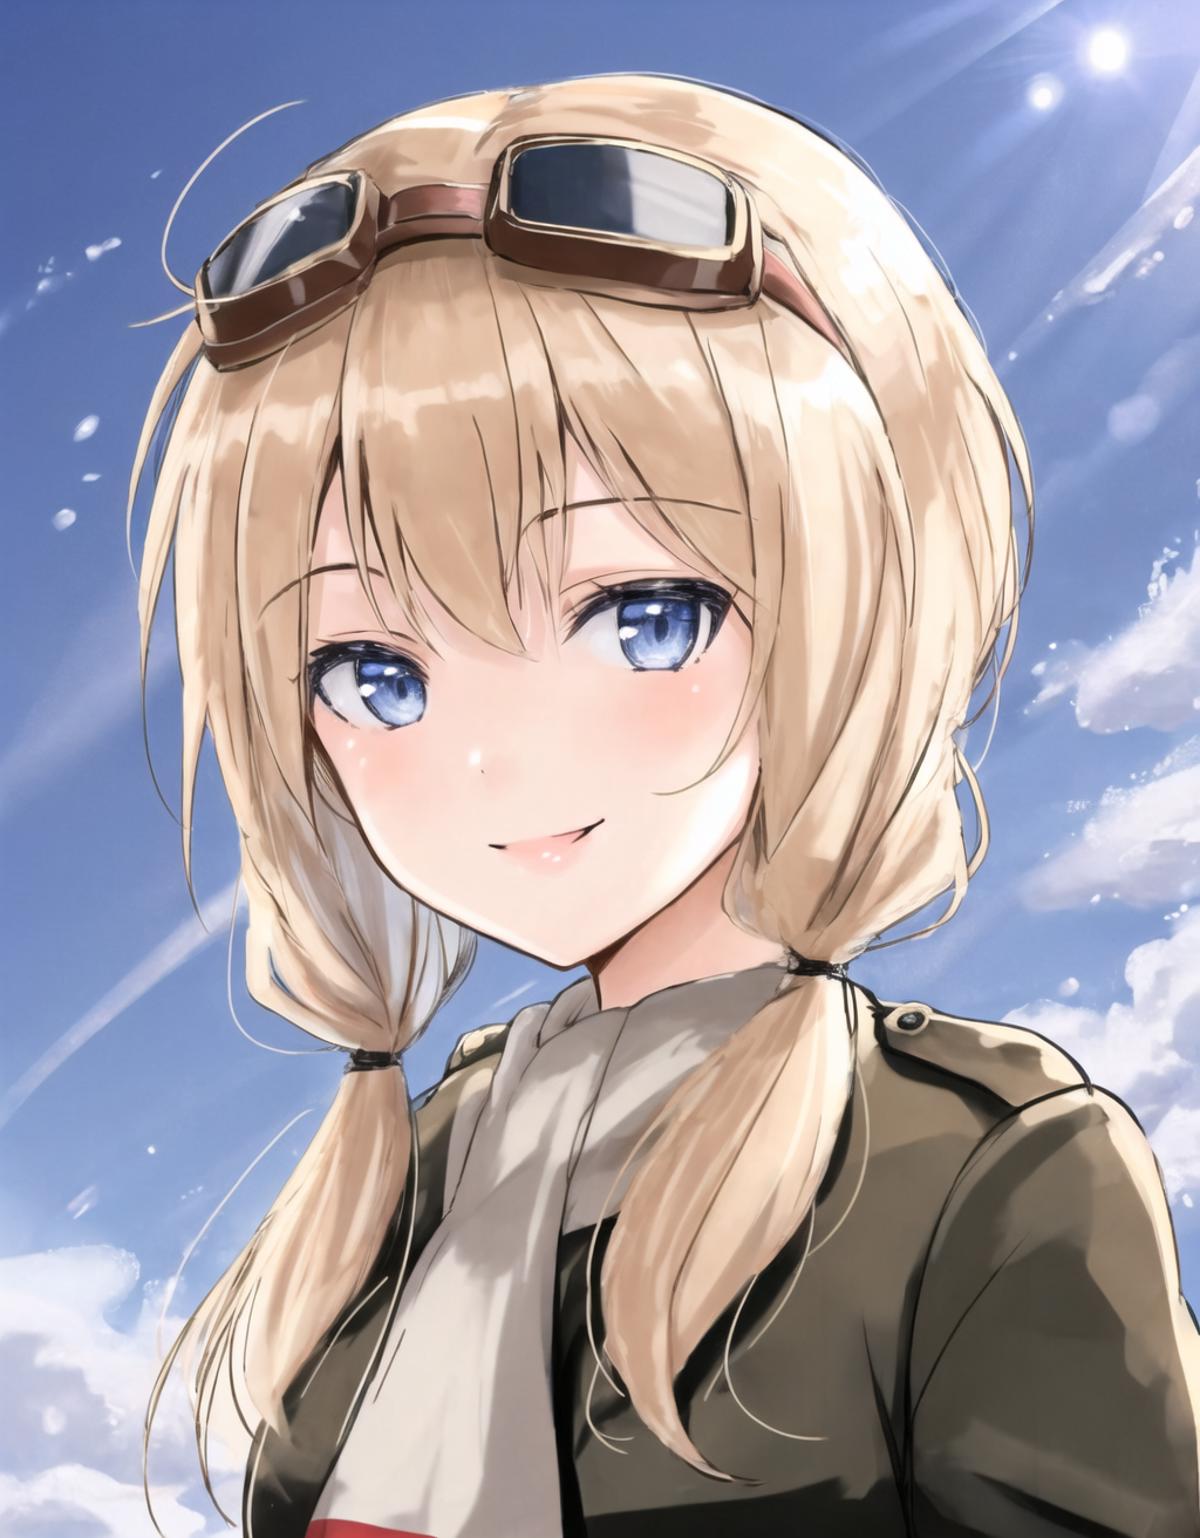 Carla J. Luksic (Strike Witches) image by Litty877